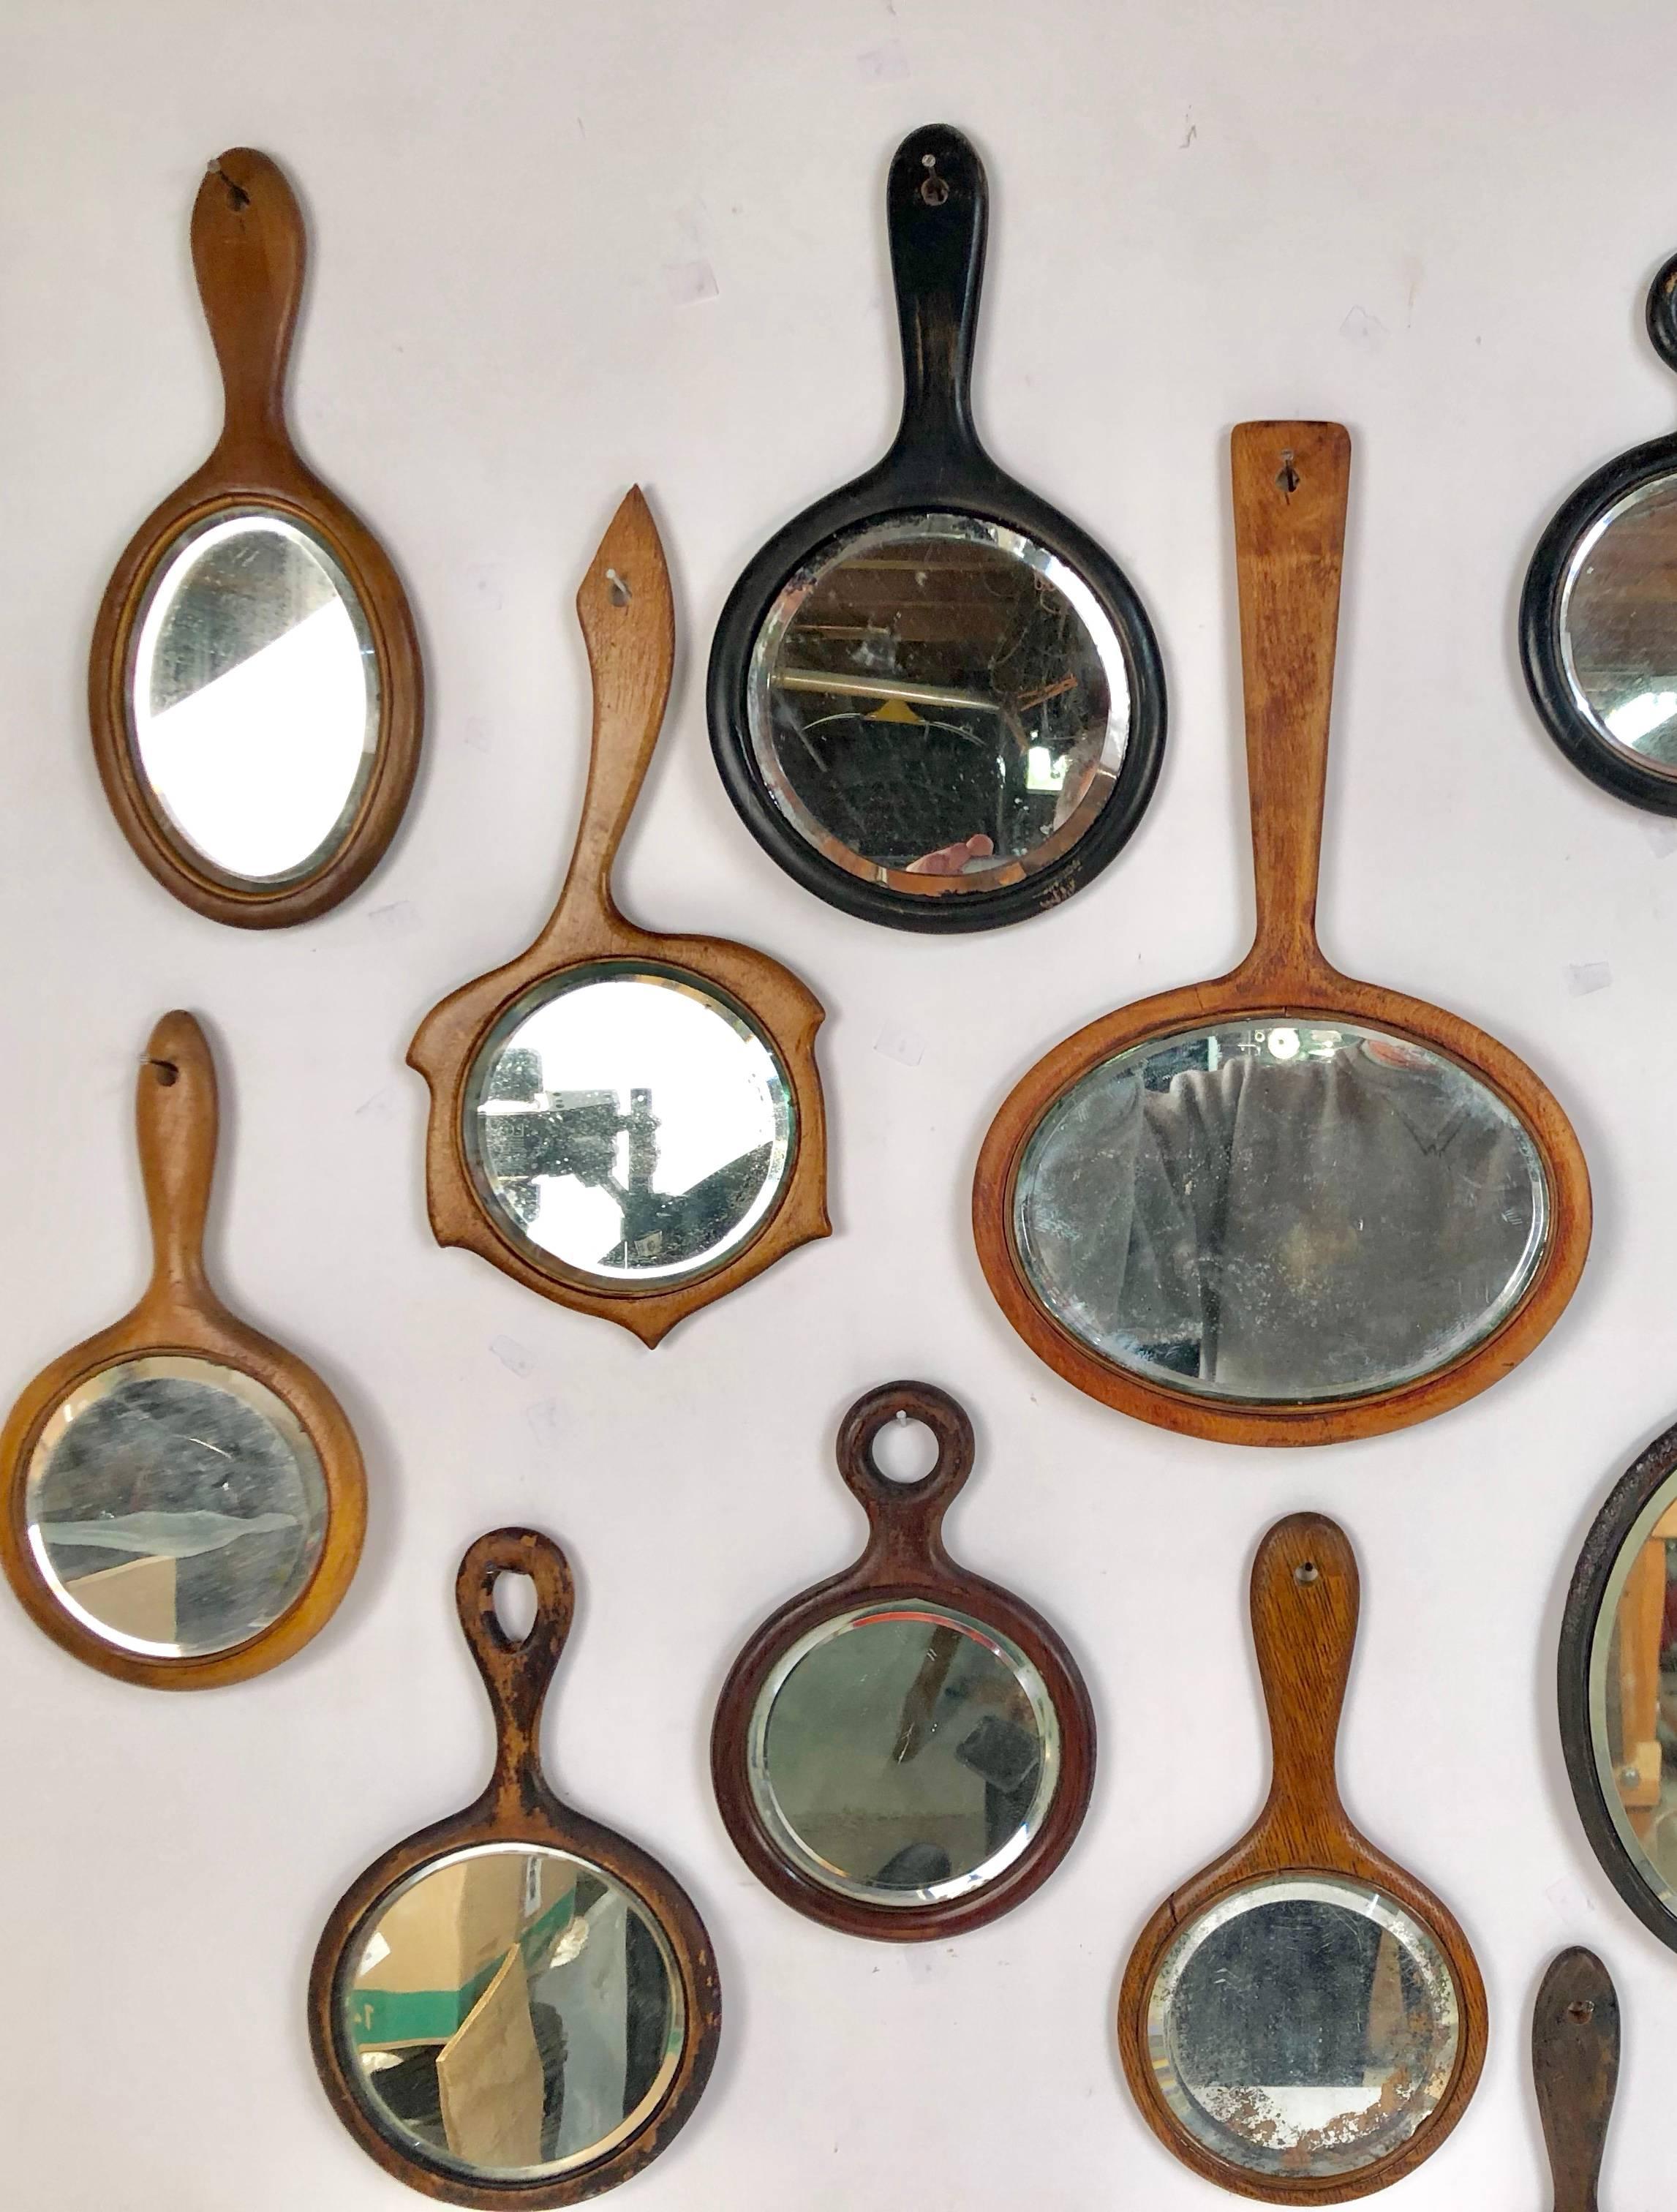 Collection of 18 antique wooden handle bevelled glass hand mirrors. Some very unusual and rare shapes. The largest measures 14 x 9.75 x .38. The smallest 4.5 x 2.5 x .13.